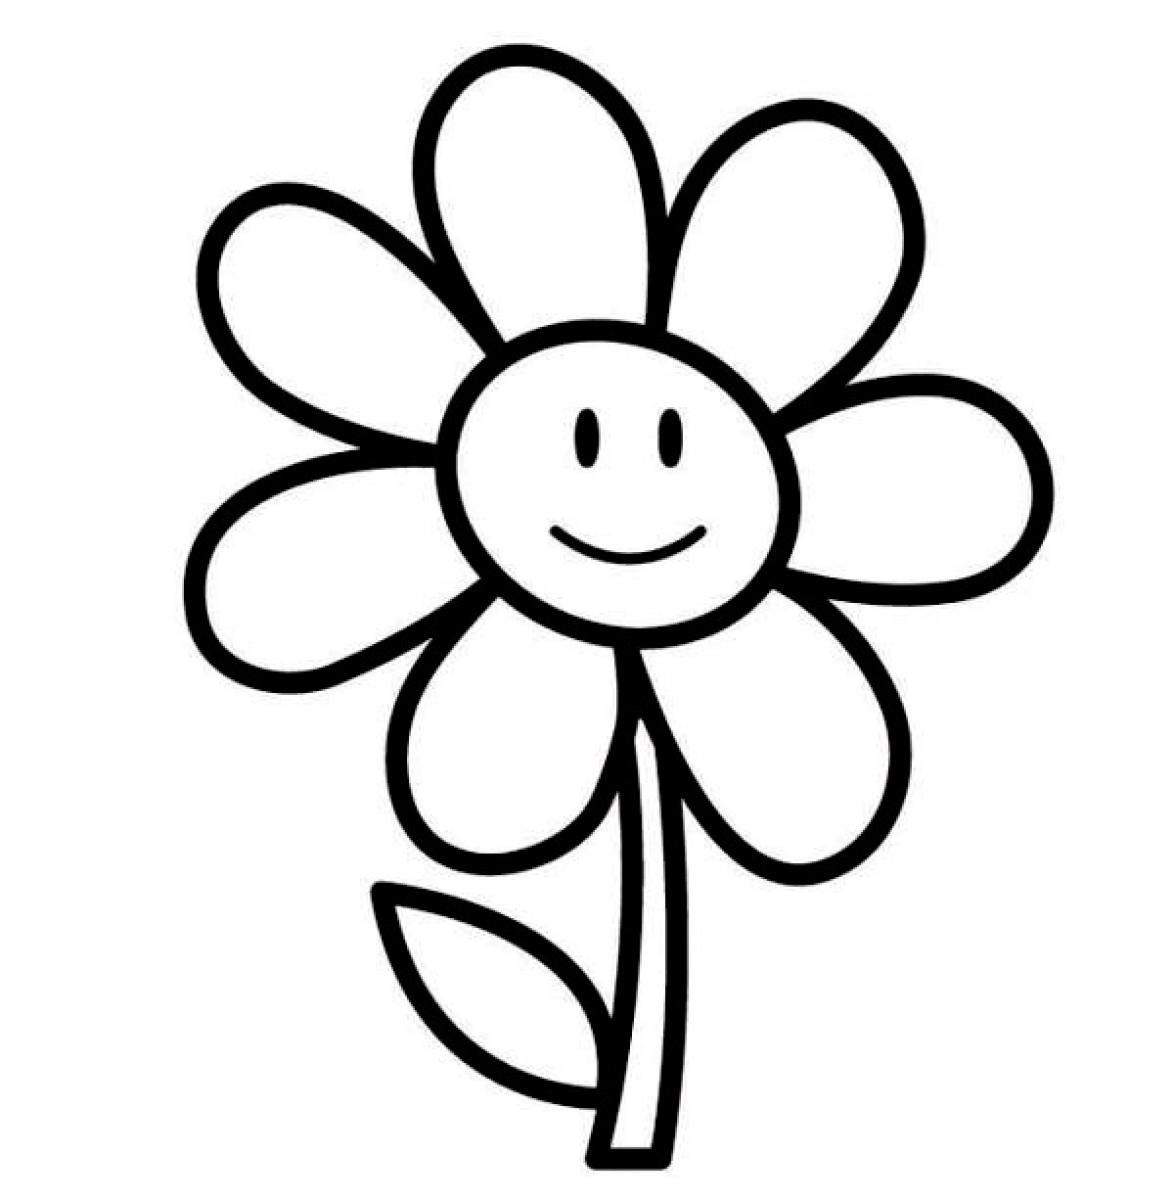 Small Flower Colouring Page  Colouring Activities for Kids